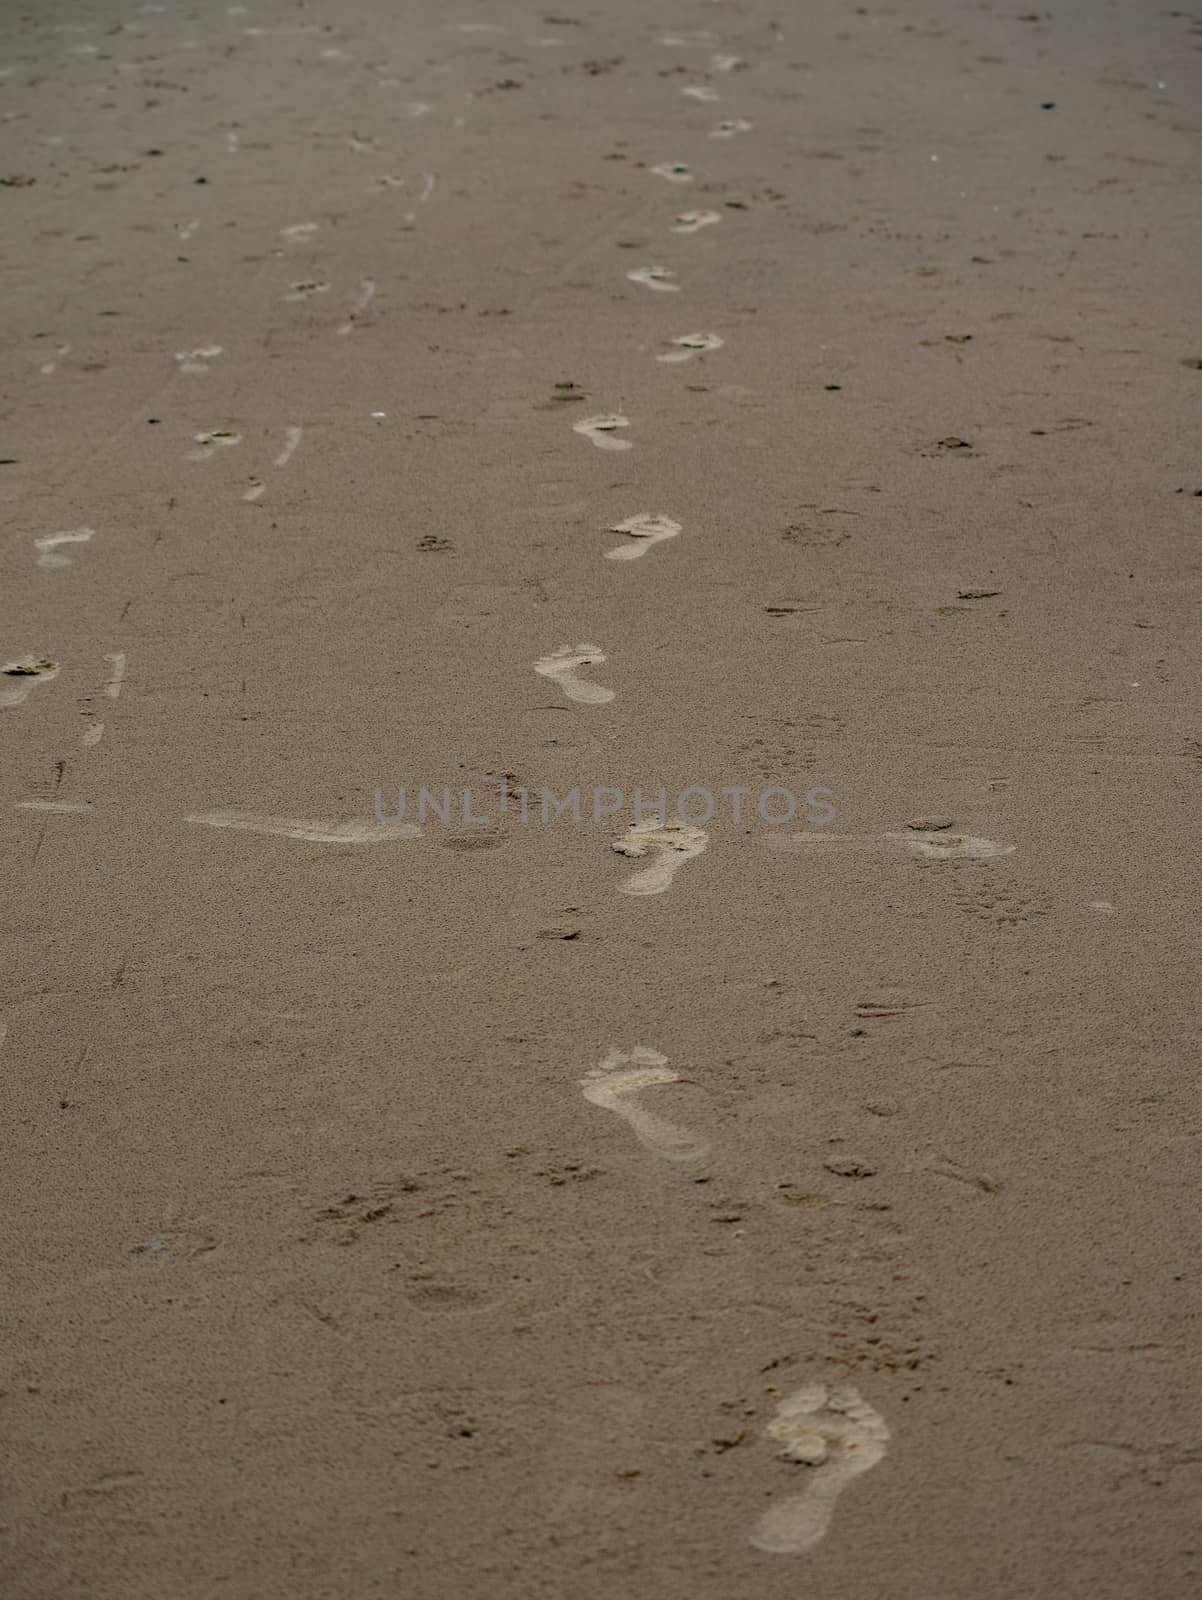 Many bare footprints on the wet sand of a beach